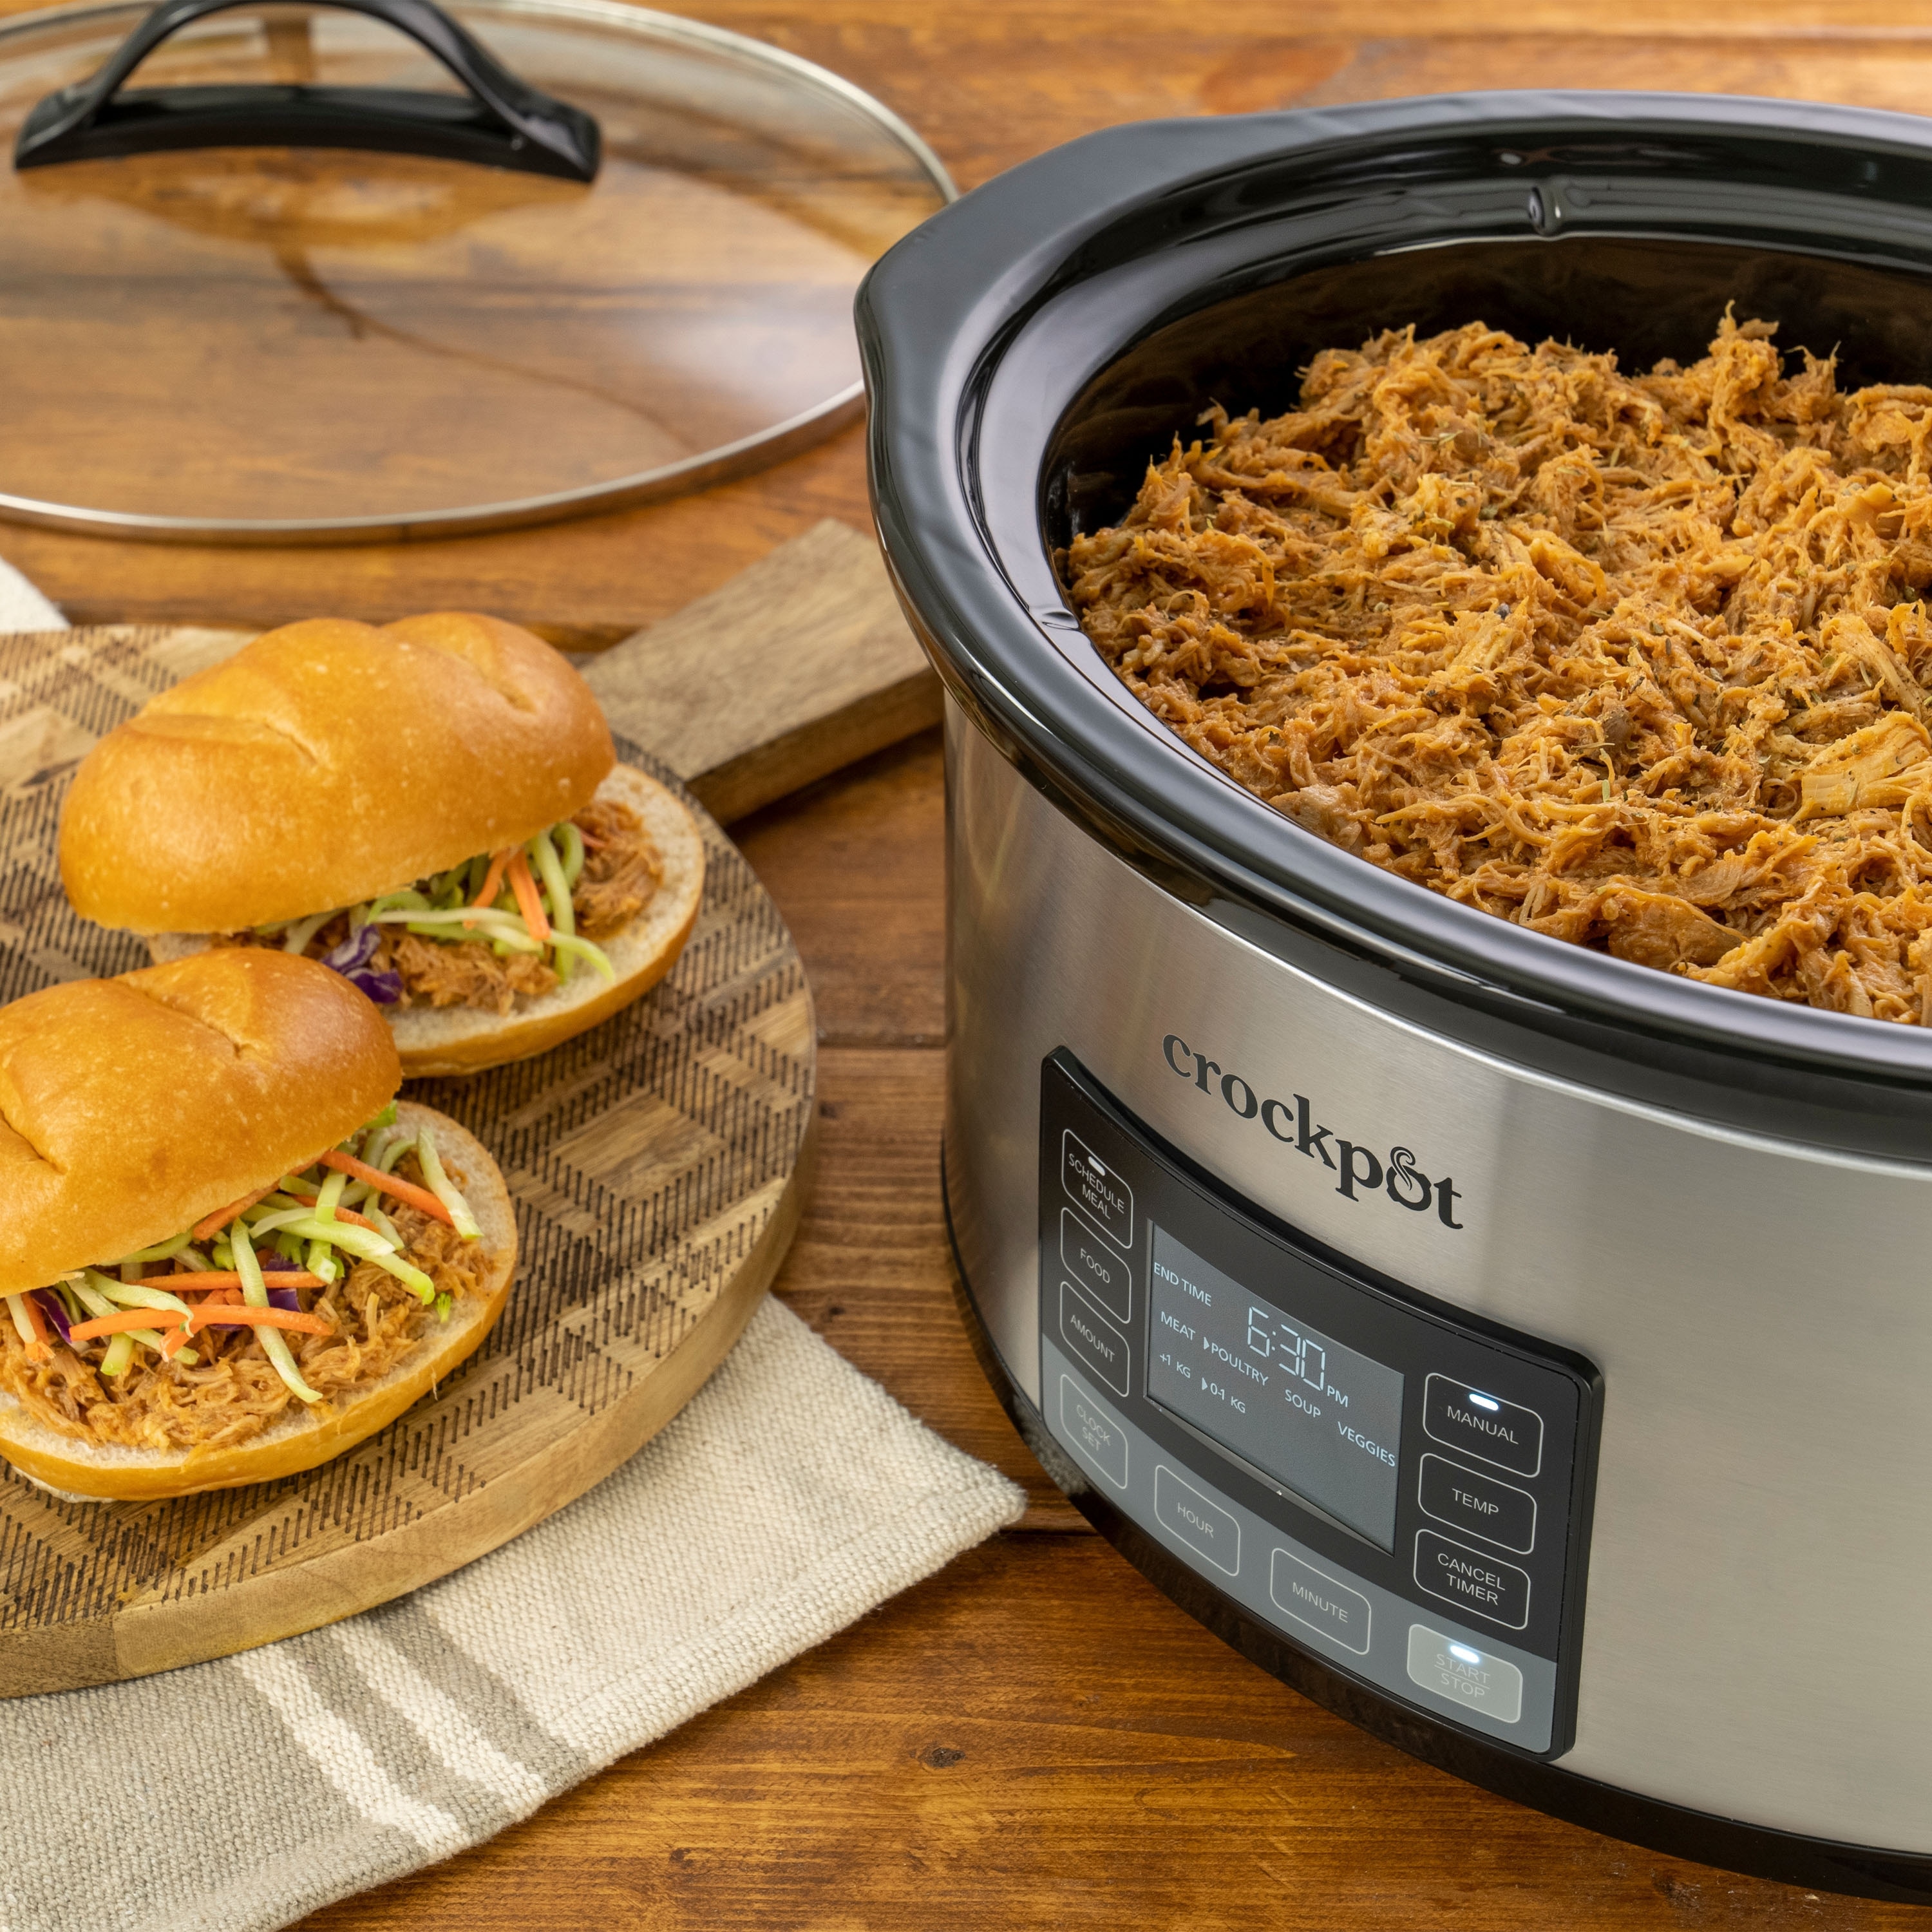 https://ak1.ostkcdn.com/images/products/is/images/direct/dea0671f1cae4186d4dd77e81e78dc7150ba20a4/Crockpot-6-Quart-Slow-Cooker-with-MyTime-Technology.jpg